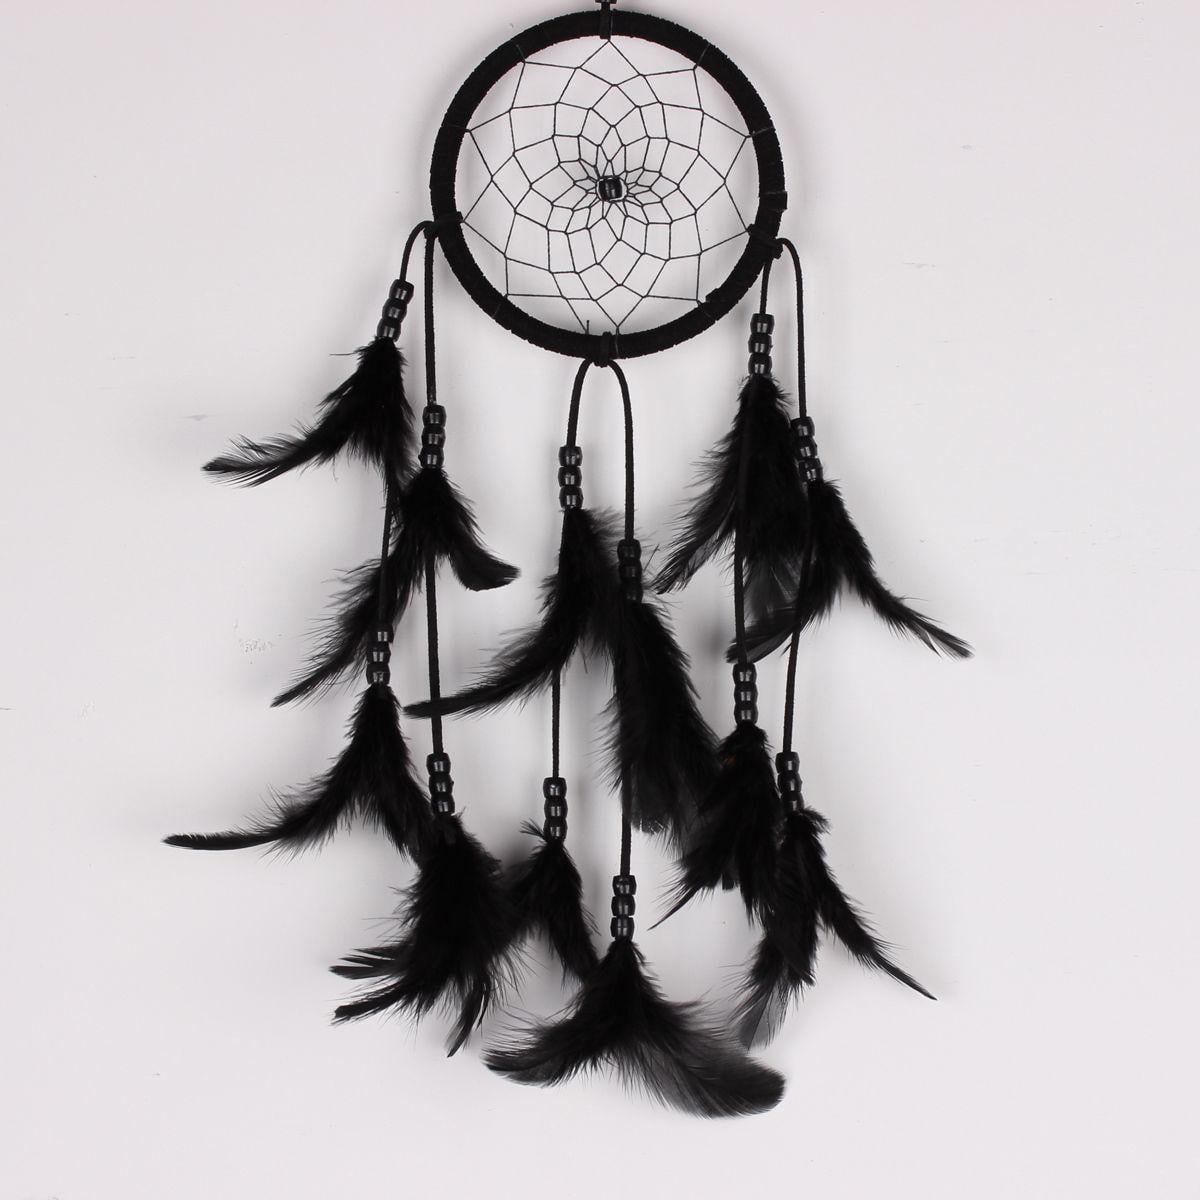 Dream Catcher Feathers Beads Handmade Car Home Wall Hanging Decor Ornament Gift 